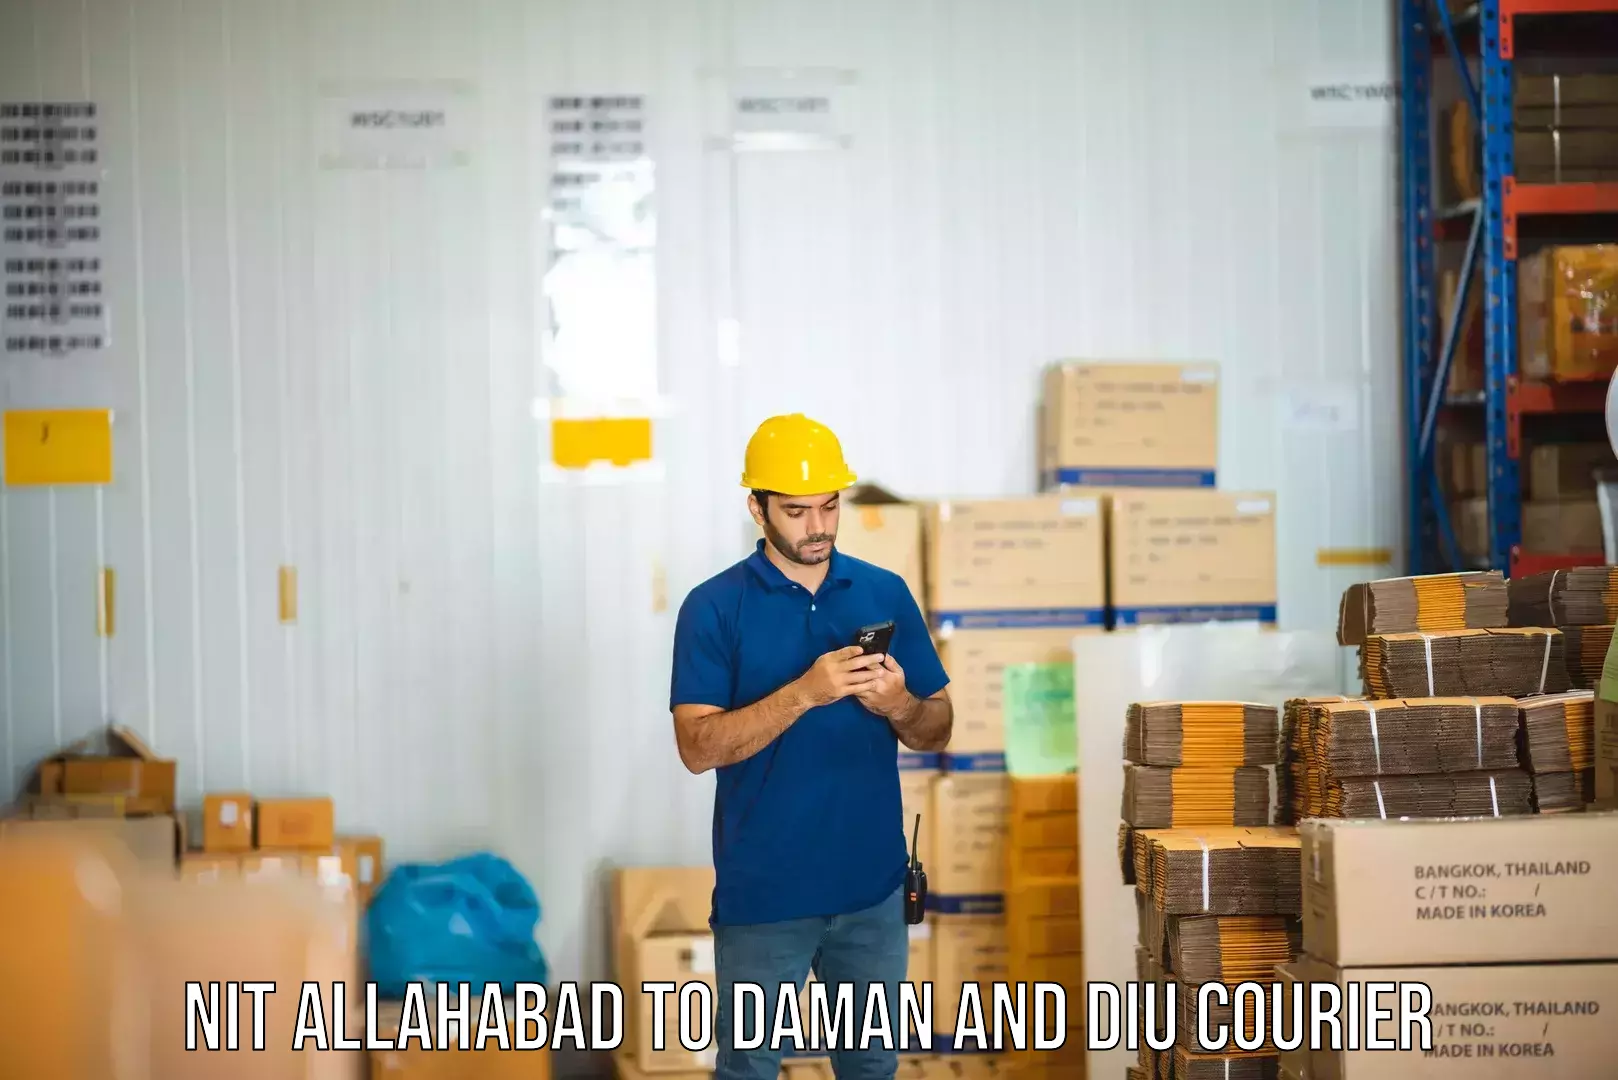 Multi-service courier options NIT Allahabad to Daman and Diu